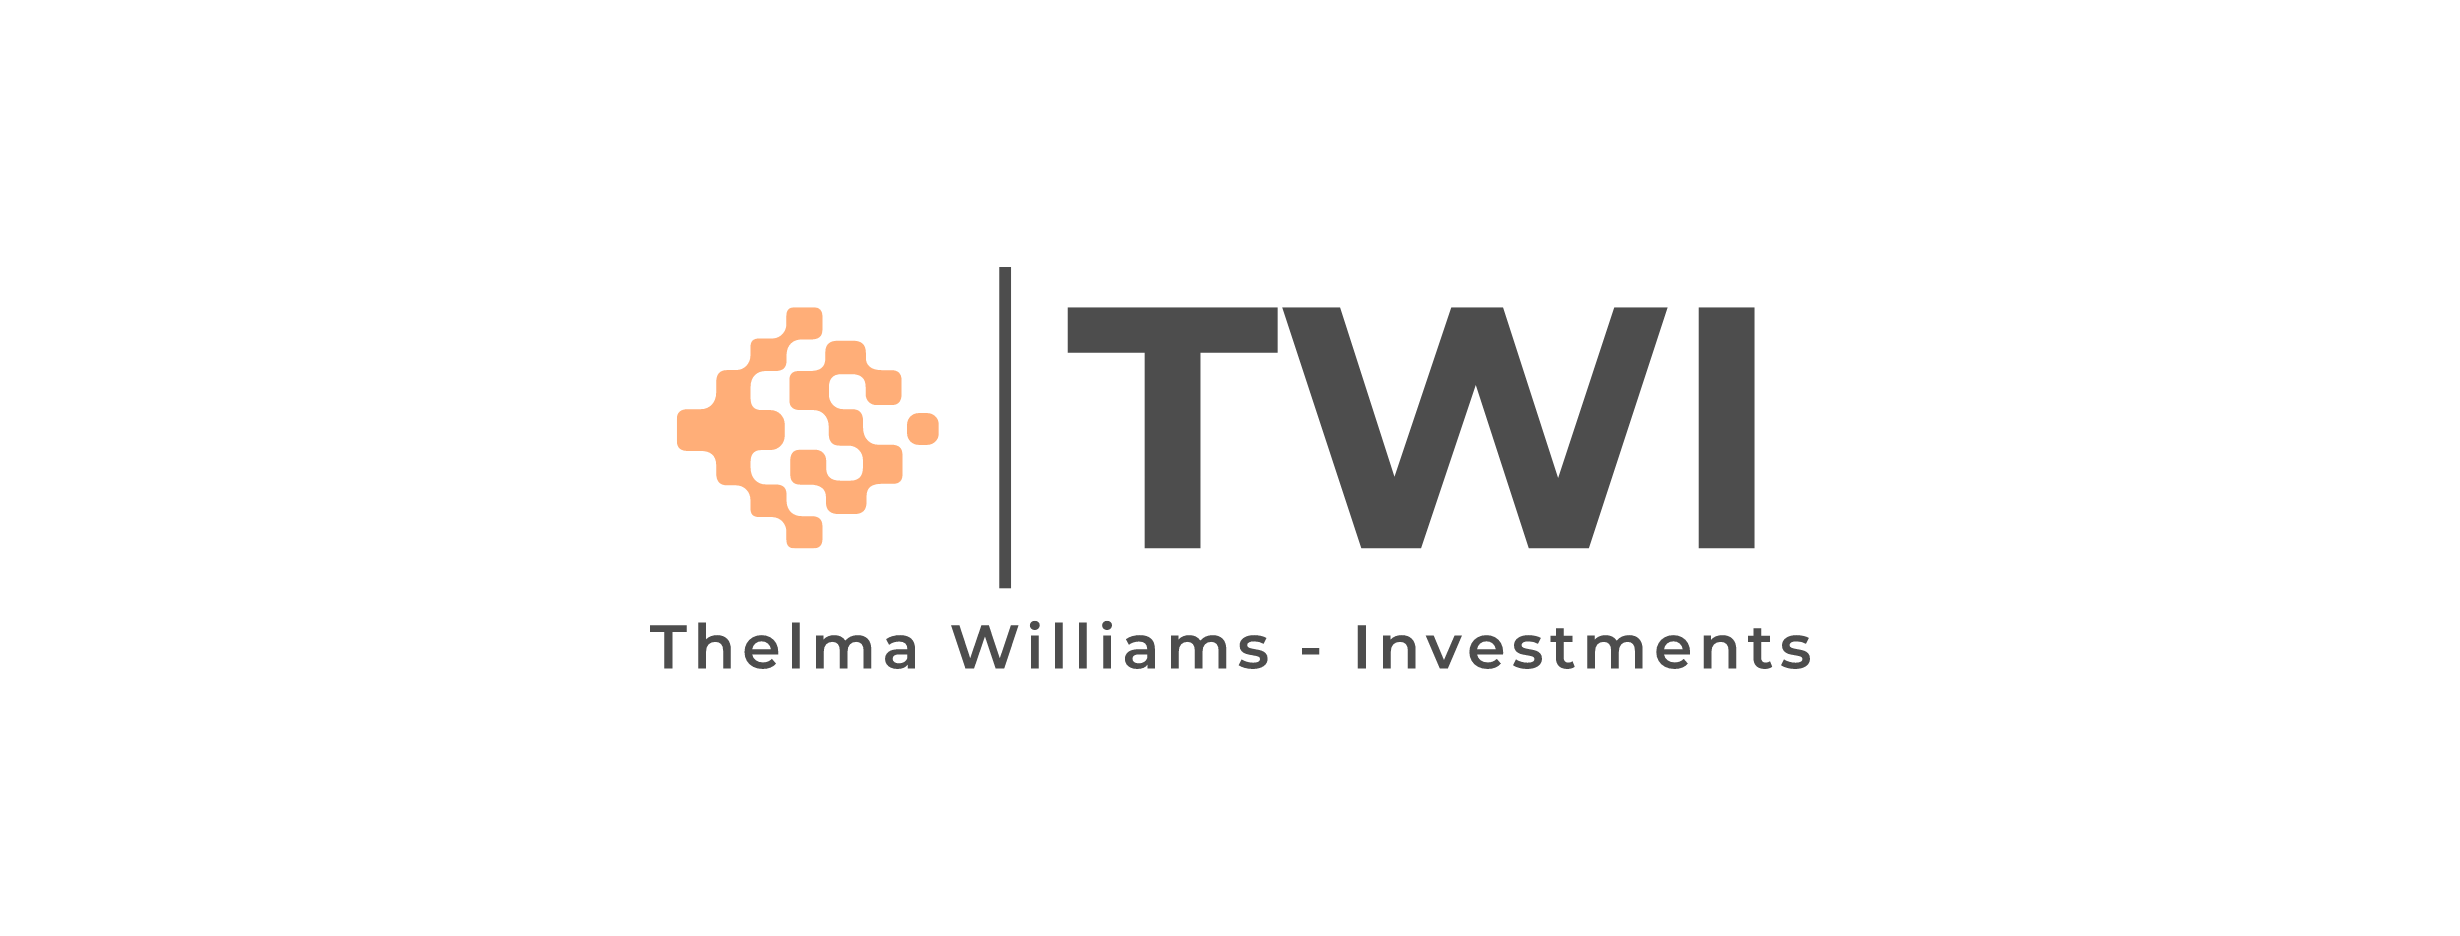 TWI - Thelma Williams - Investments